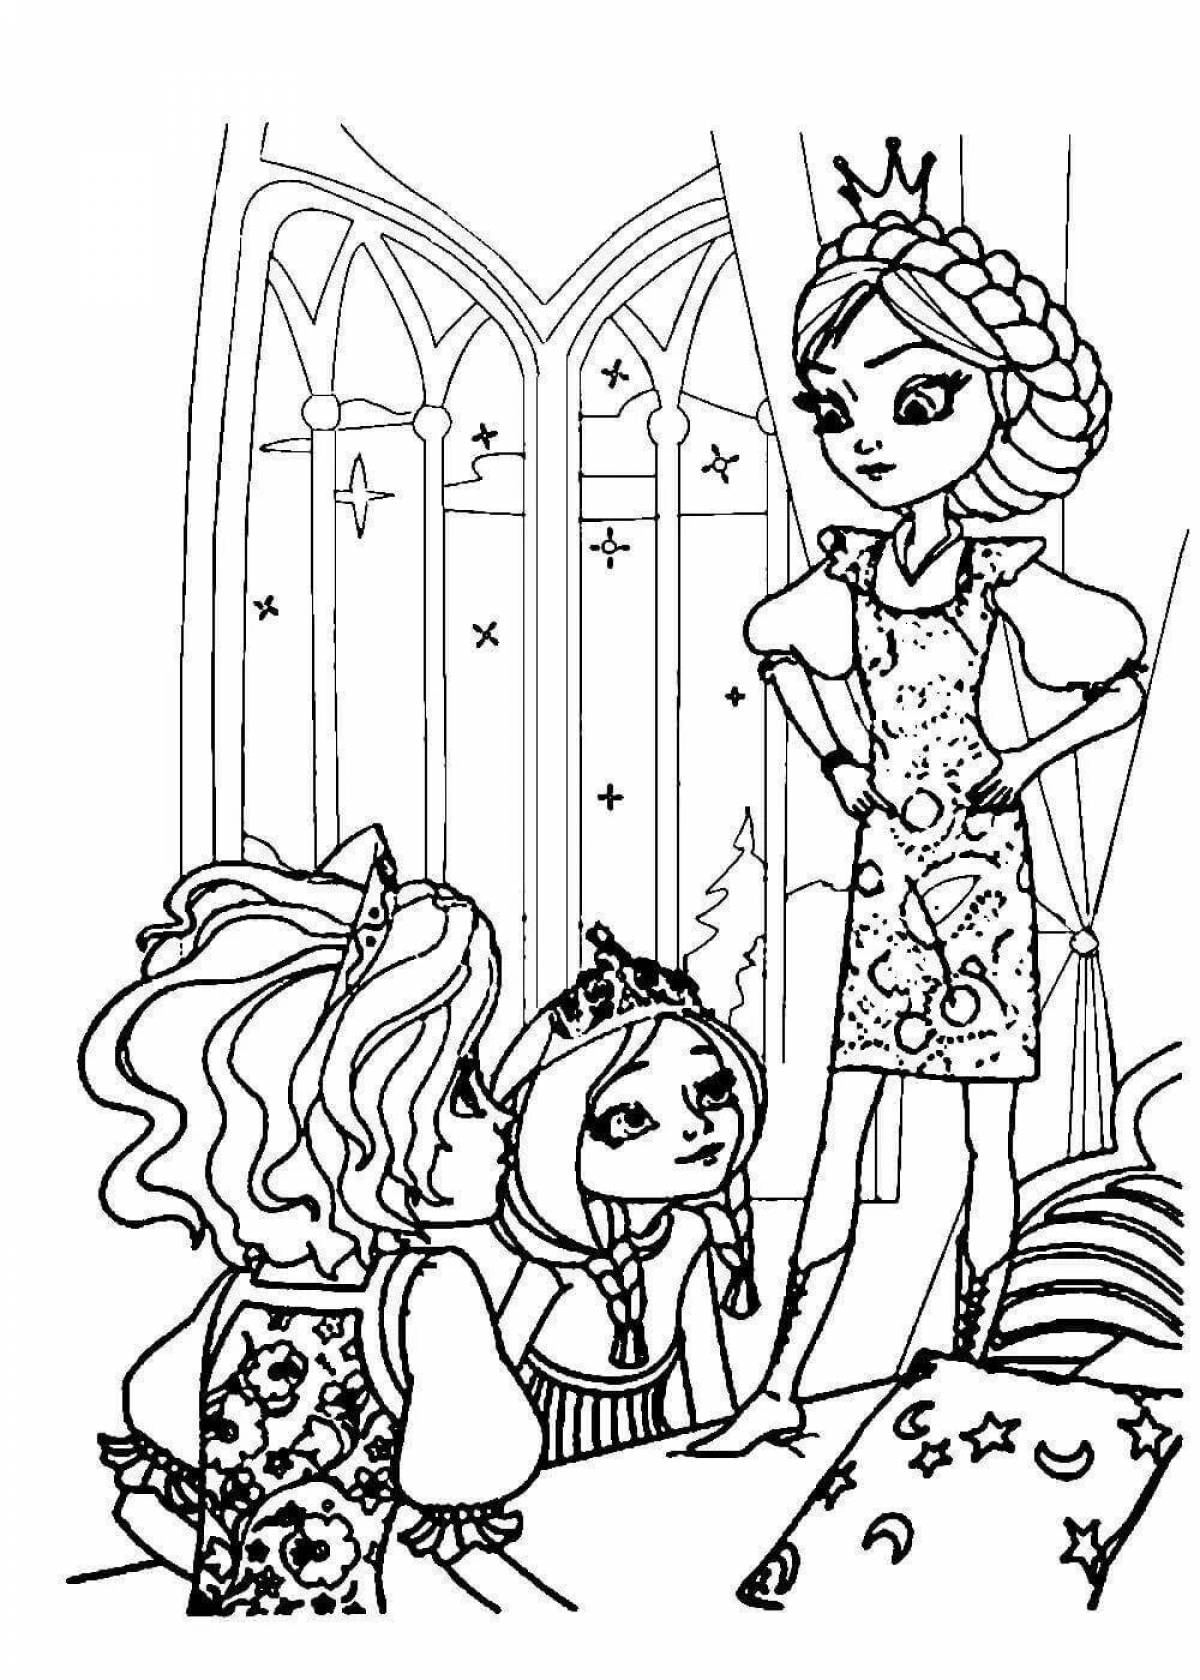 Playful princesses are preparing coloring pages